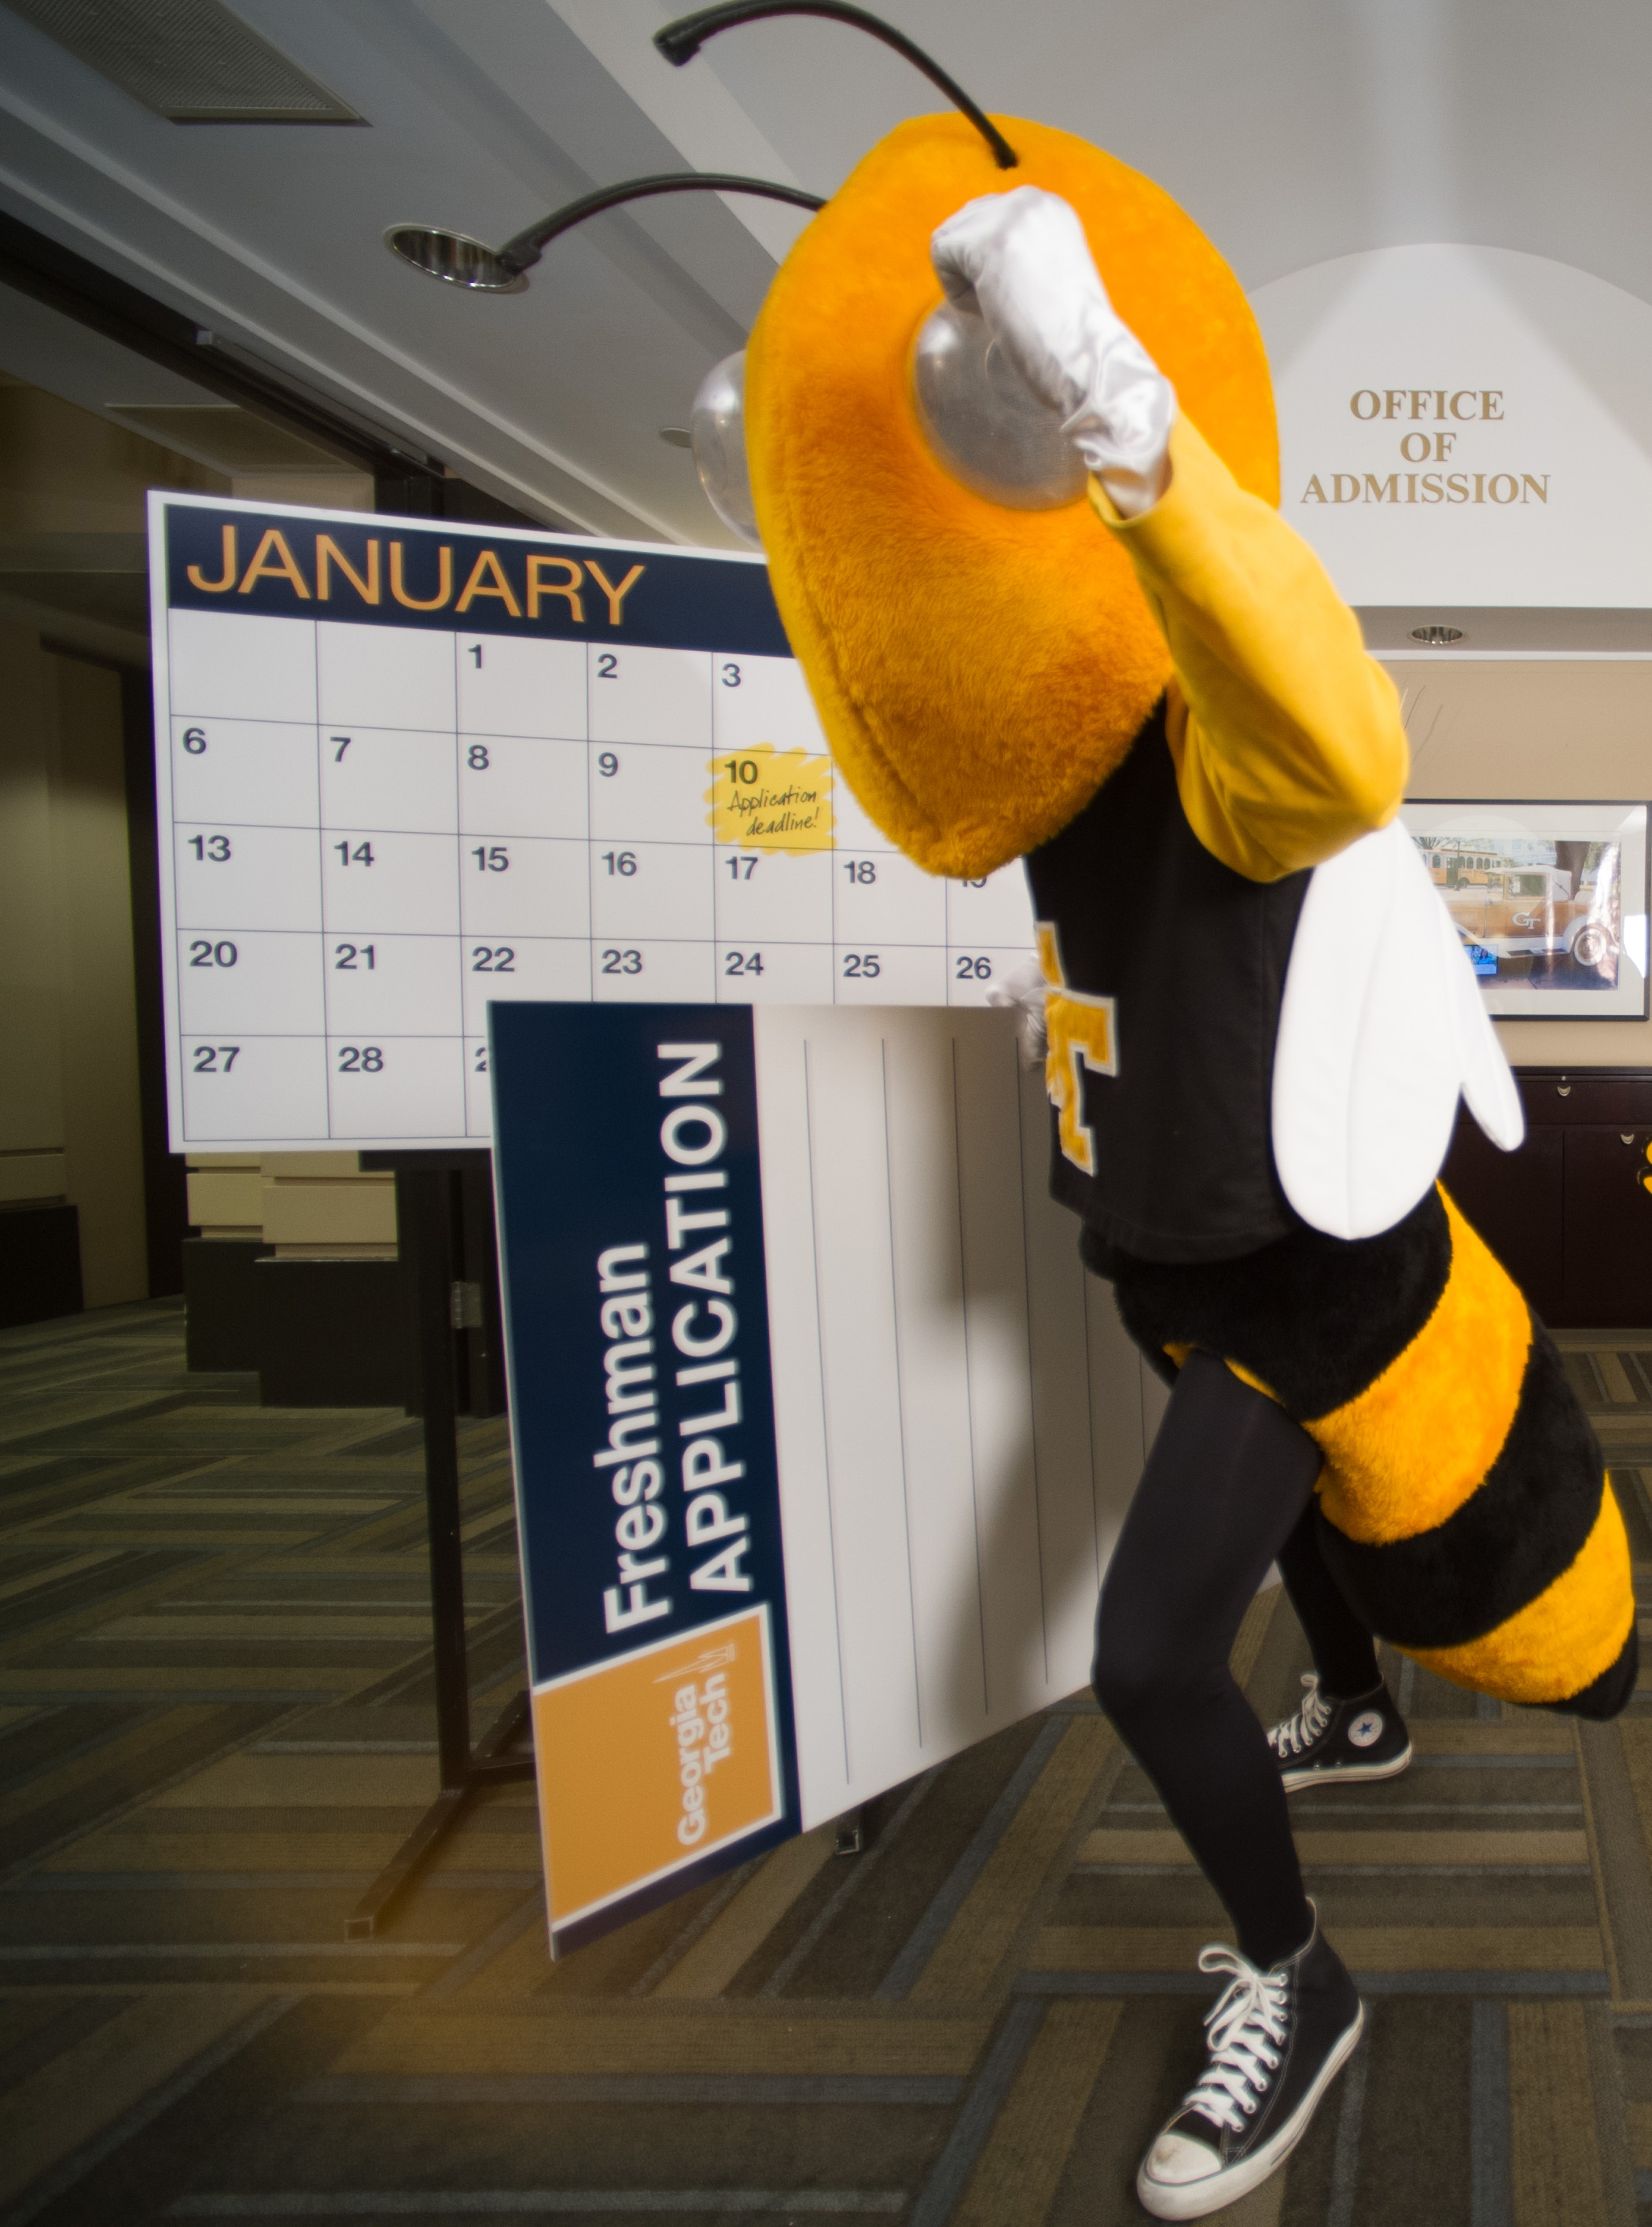 Buzz celebrates Early Action admits, with his calendar marked for the regular decision deadline on Jan. 10, 2014.